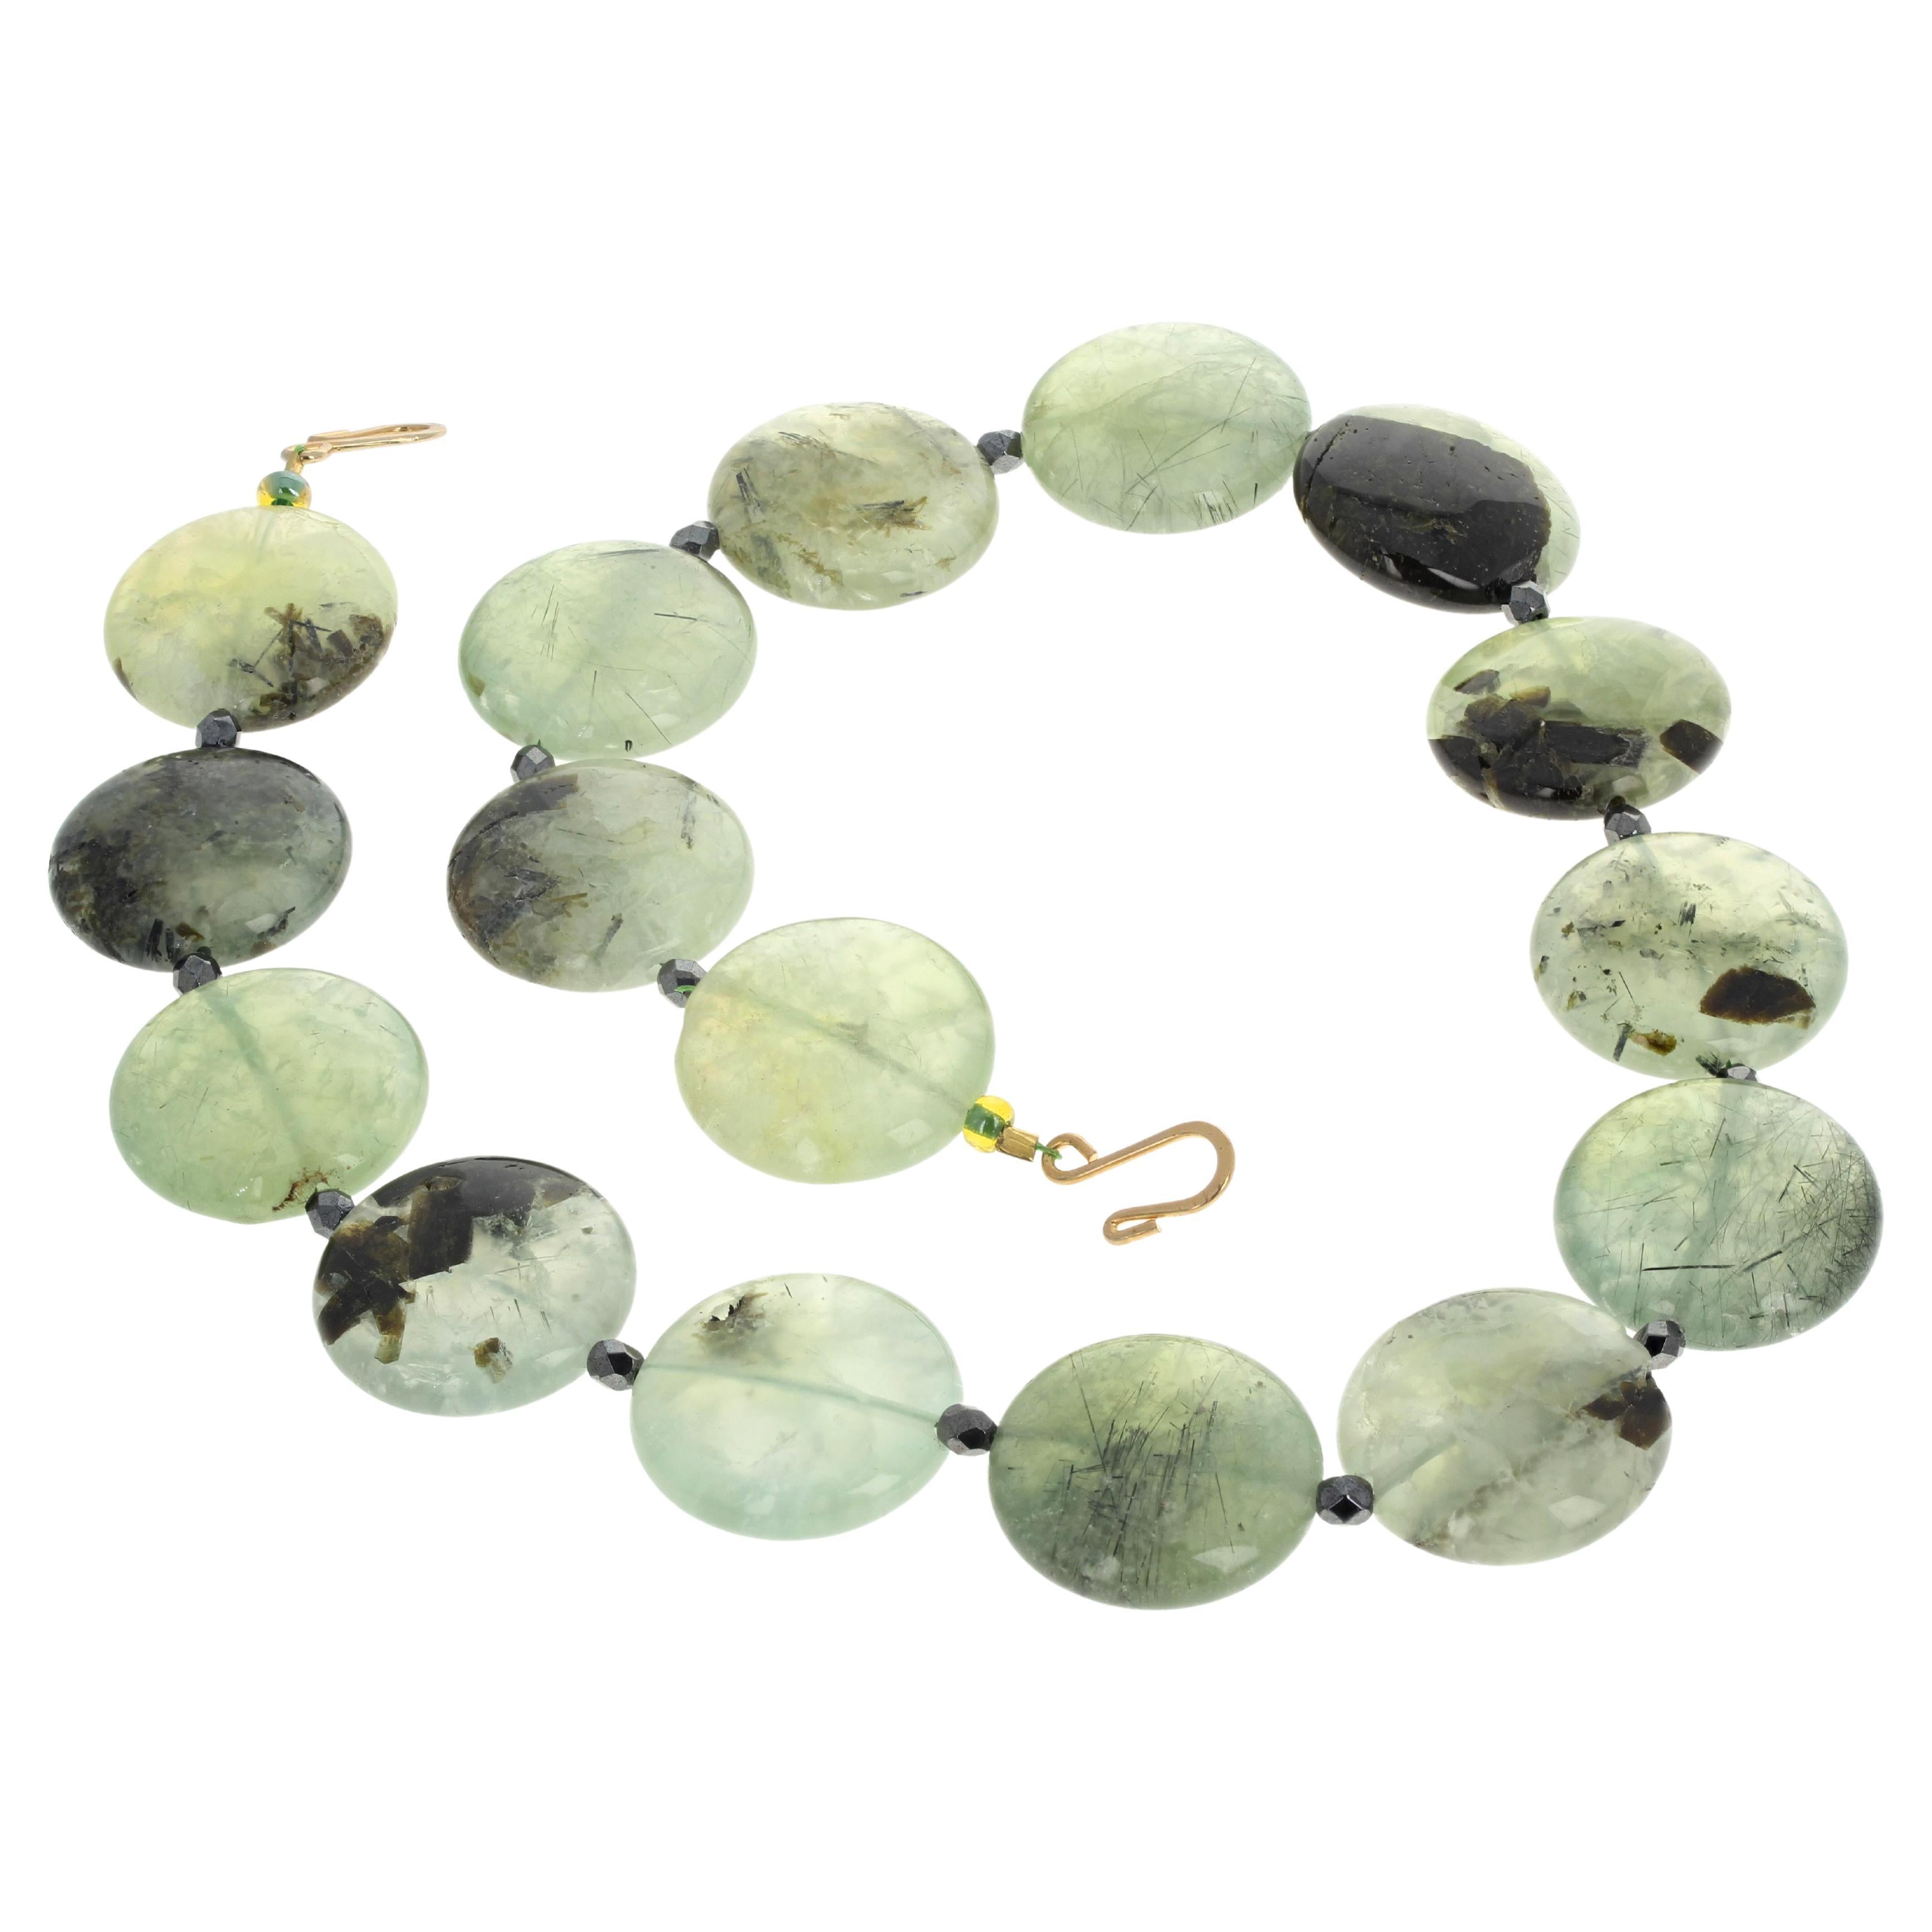 AJD Beautiful Natural Dramatically Artistic Real Prehnite Rondels Necklace